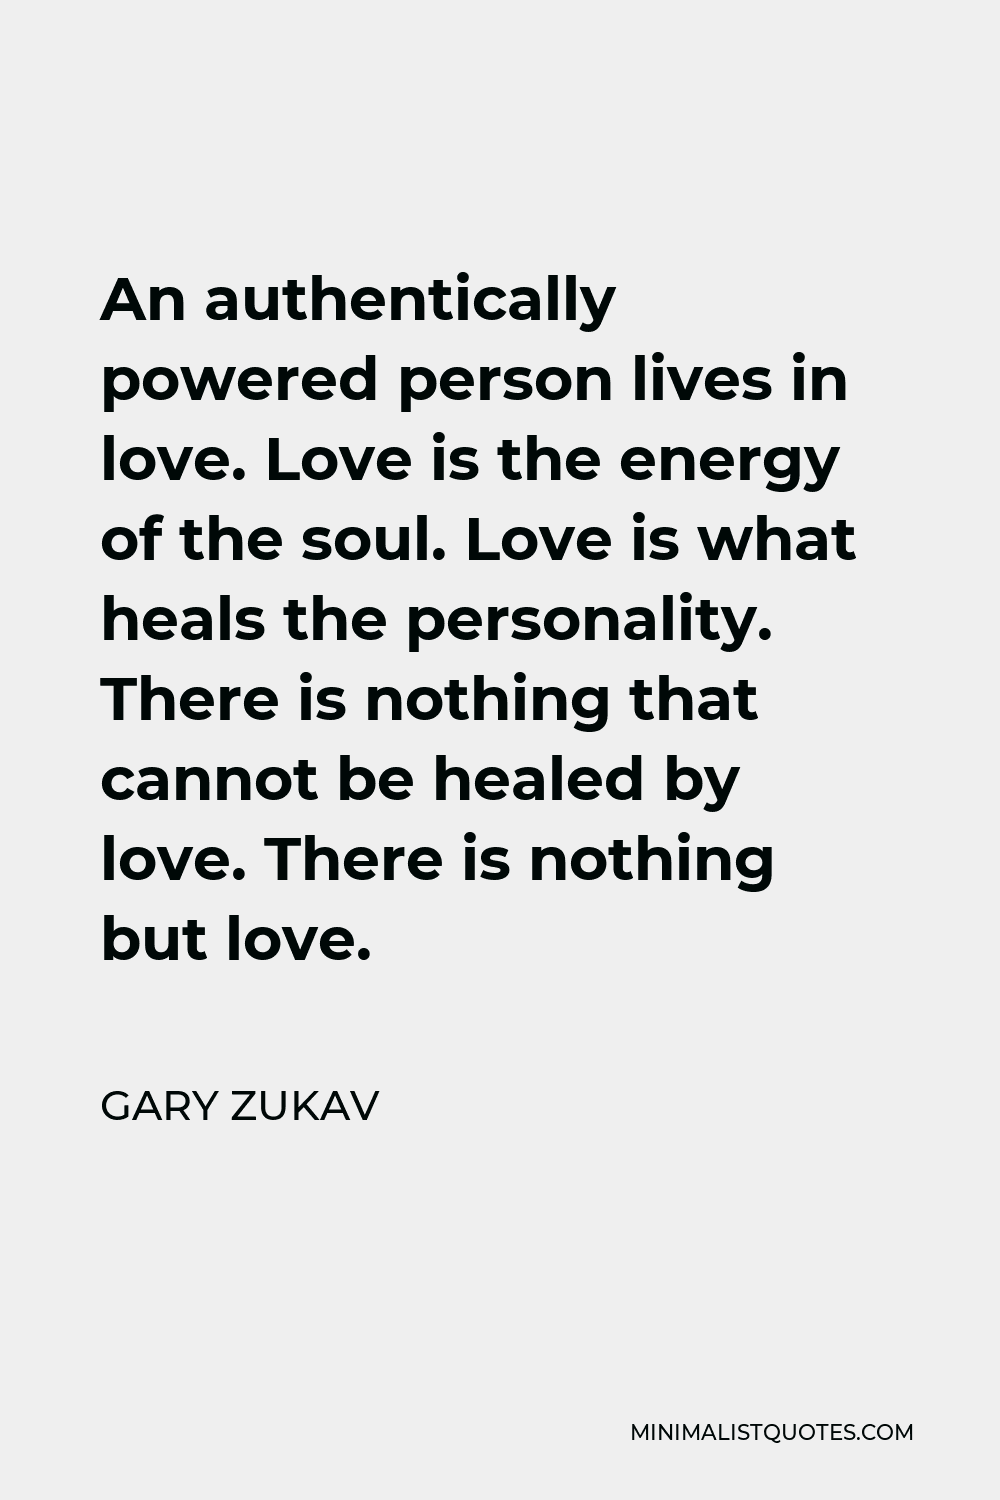 Gary Zukav Quote - An authentically powered person lives in love. Love is the energy of the soul. Love is what heals the personality. There is nothing that cannot be healed by love. There is nothing but love.